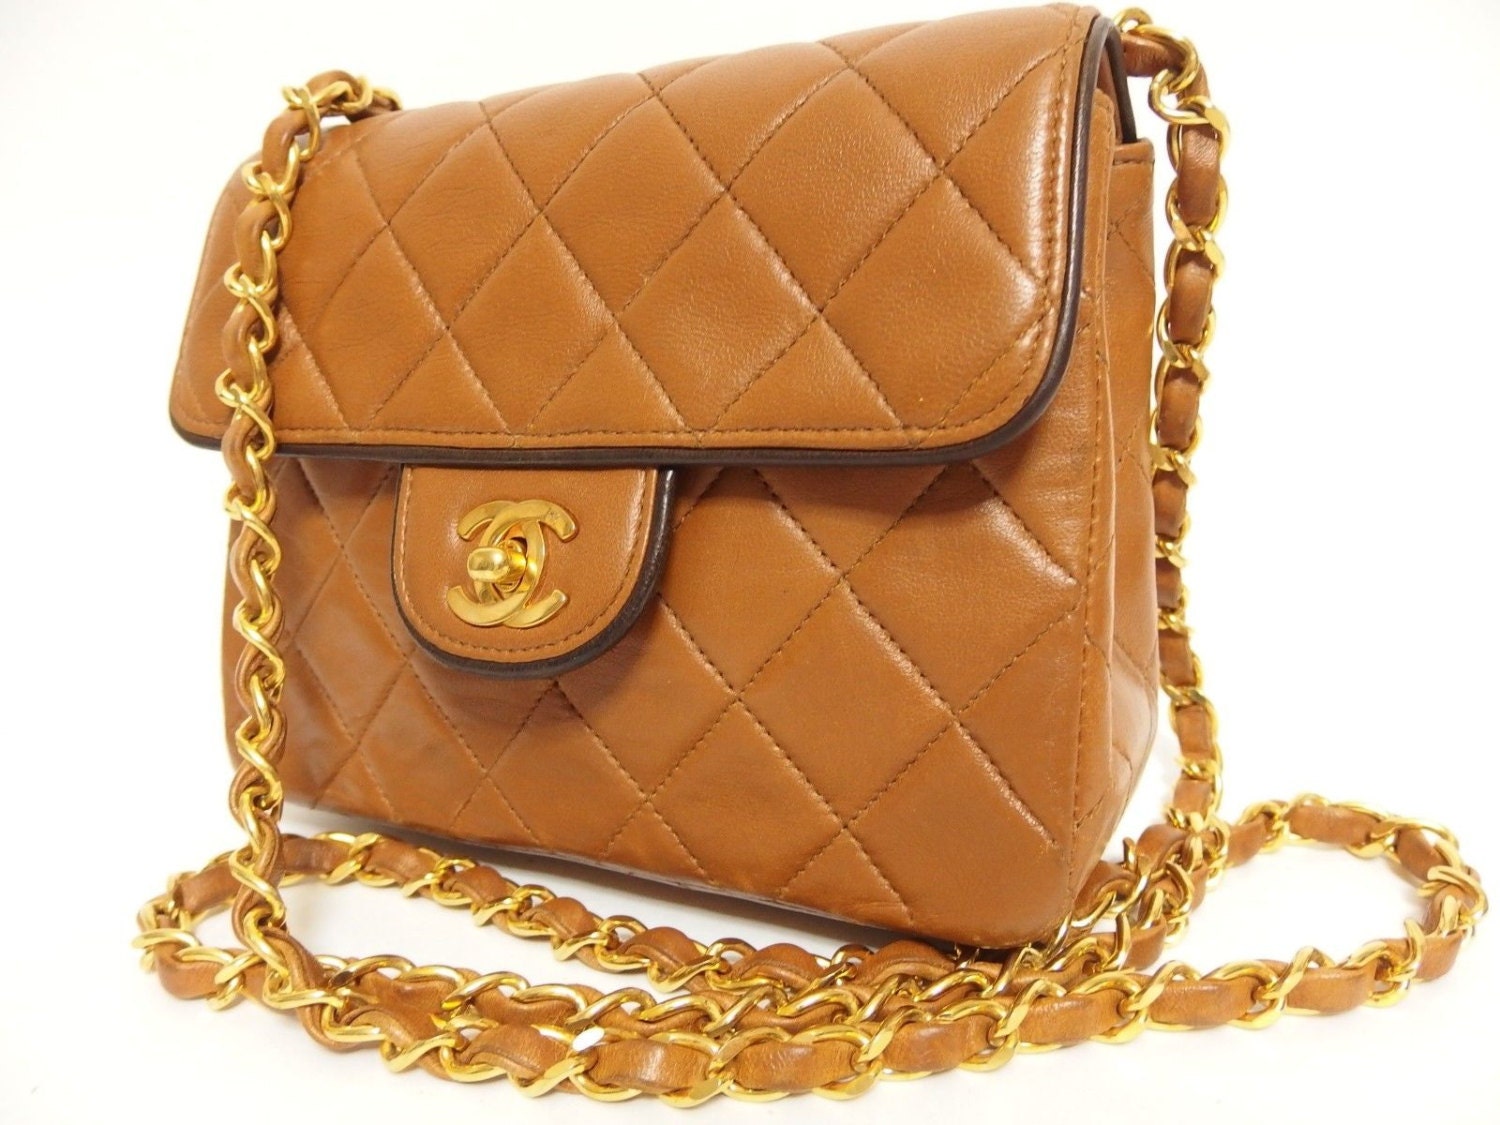 SALE! CHANEL / Rare Vintage Quilted Chain Shoulder Bag Small Matelasse